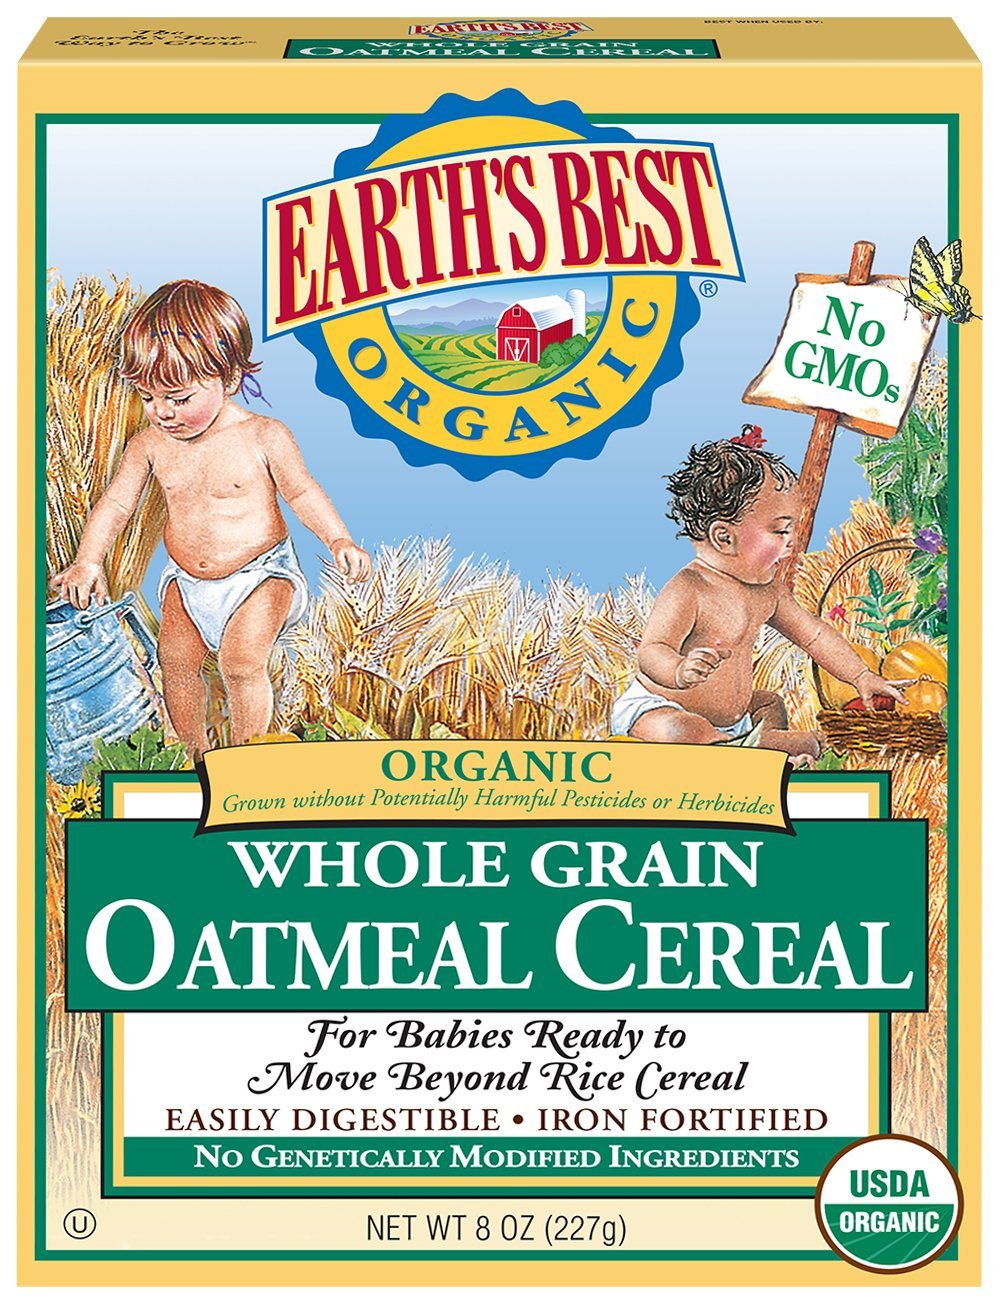 Earth's Best Organic Baby Food, Whole Grain Oatmeal Cereal*